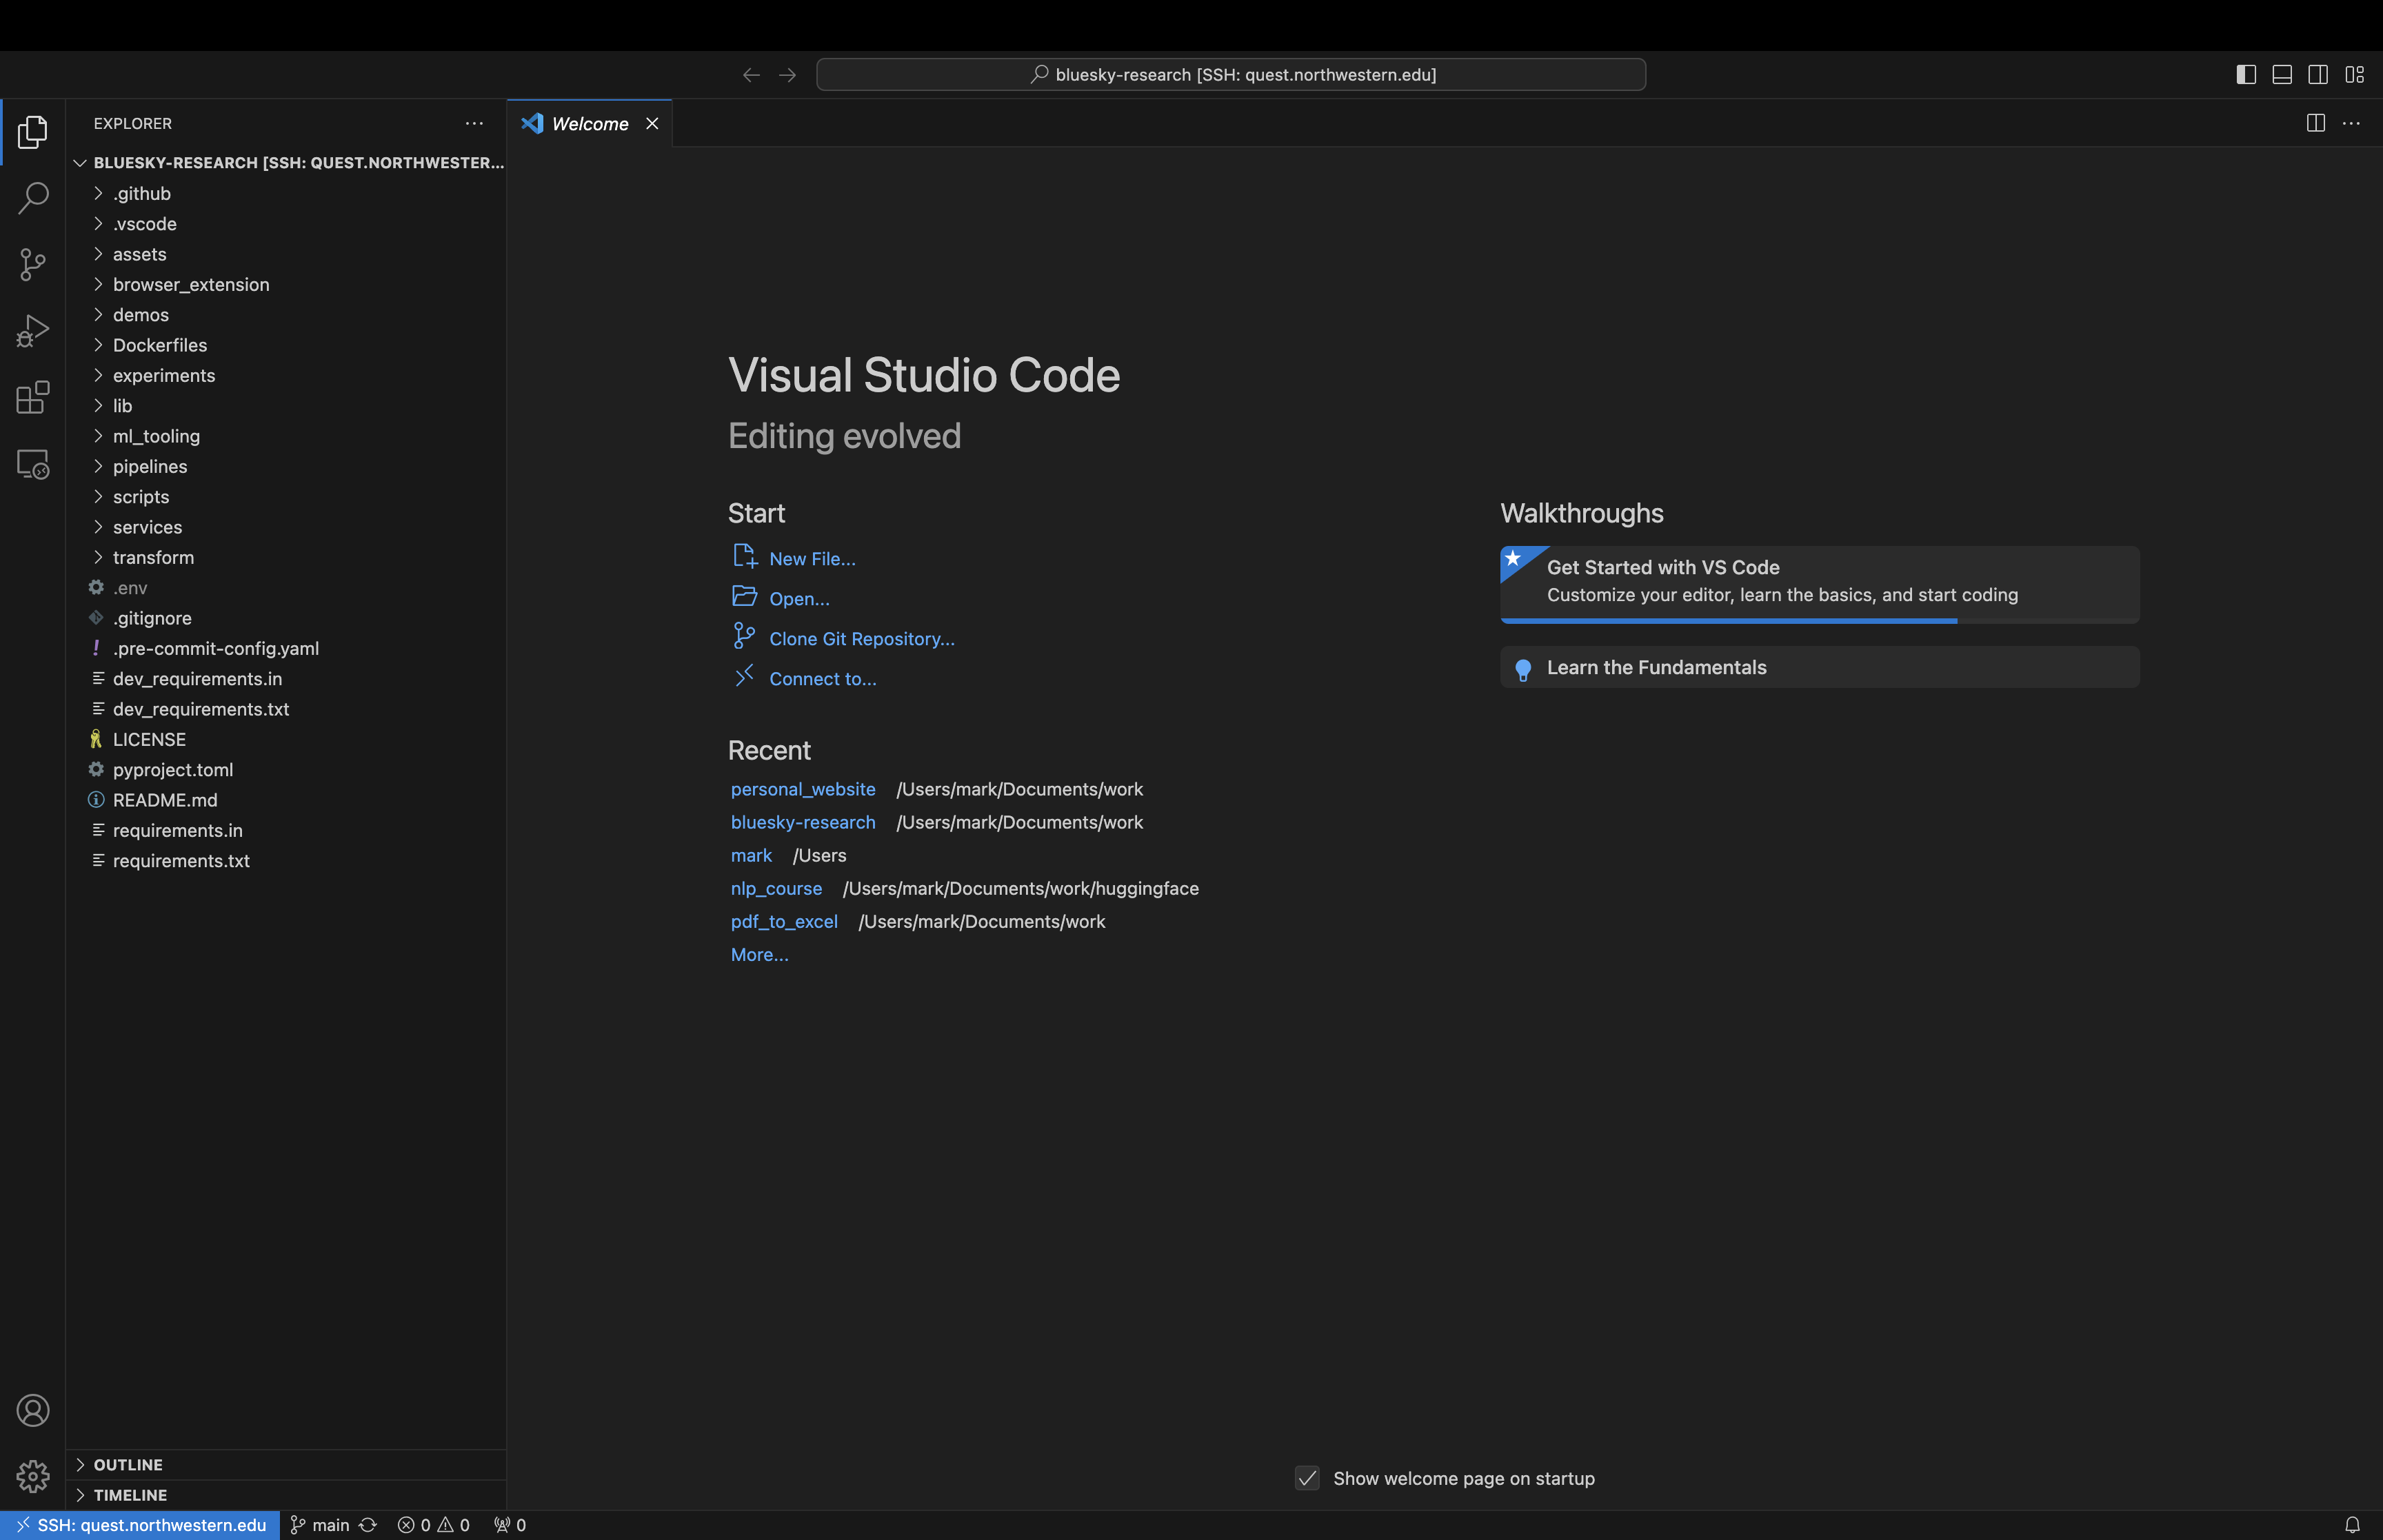 VSCode connected to KLC cluster via remote SSH tunneling